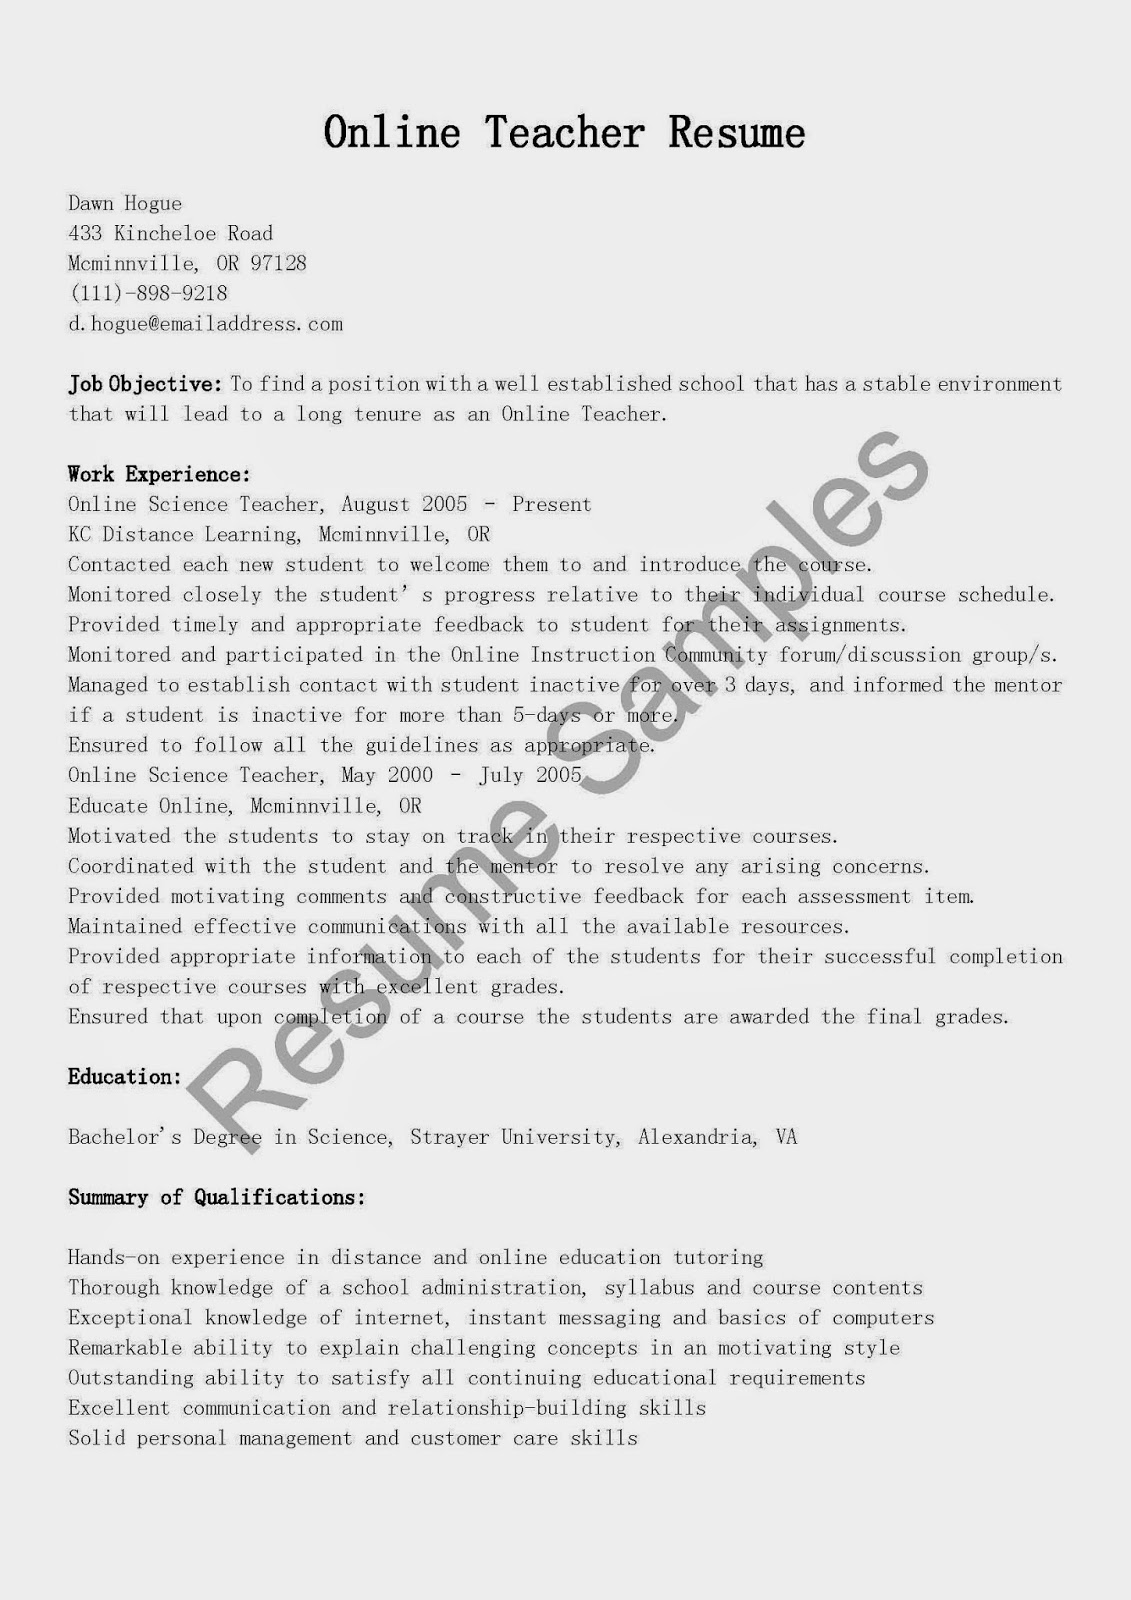 Find a cosmetologist resume online